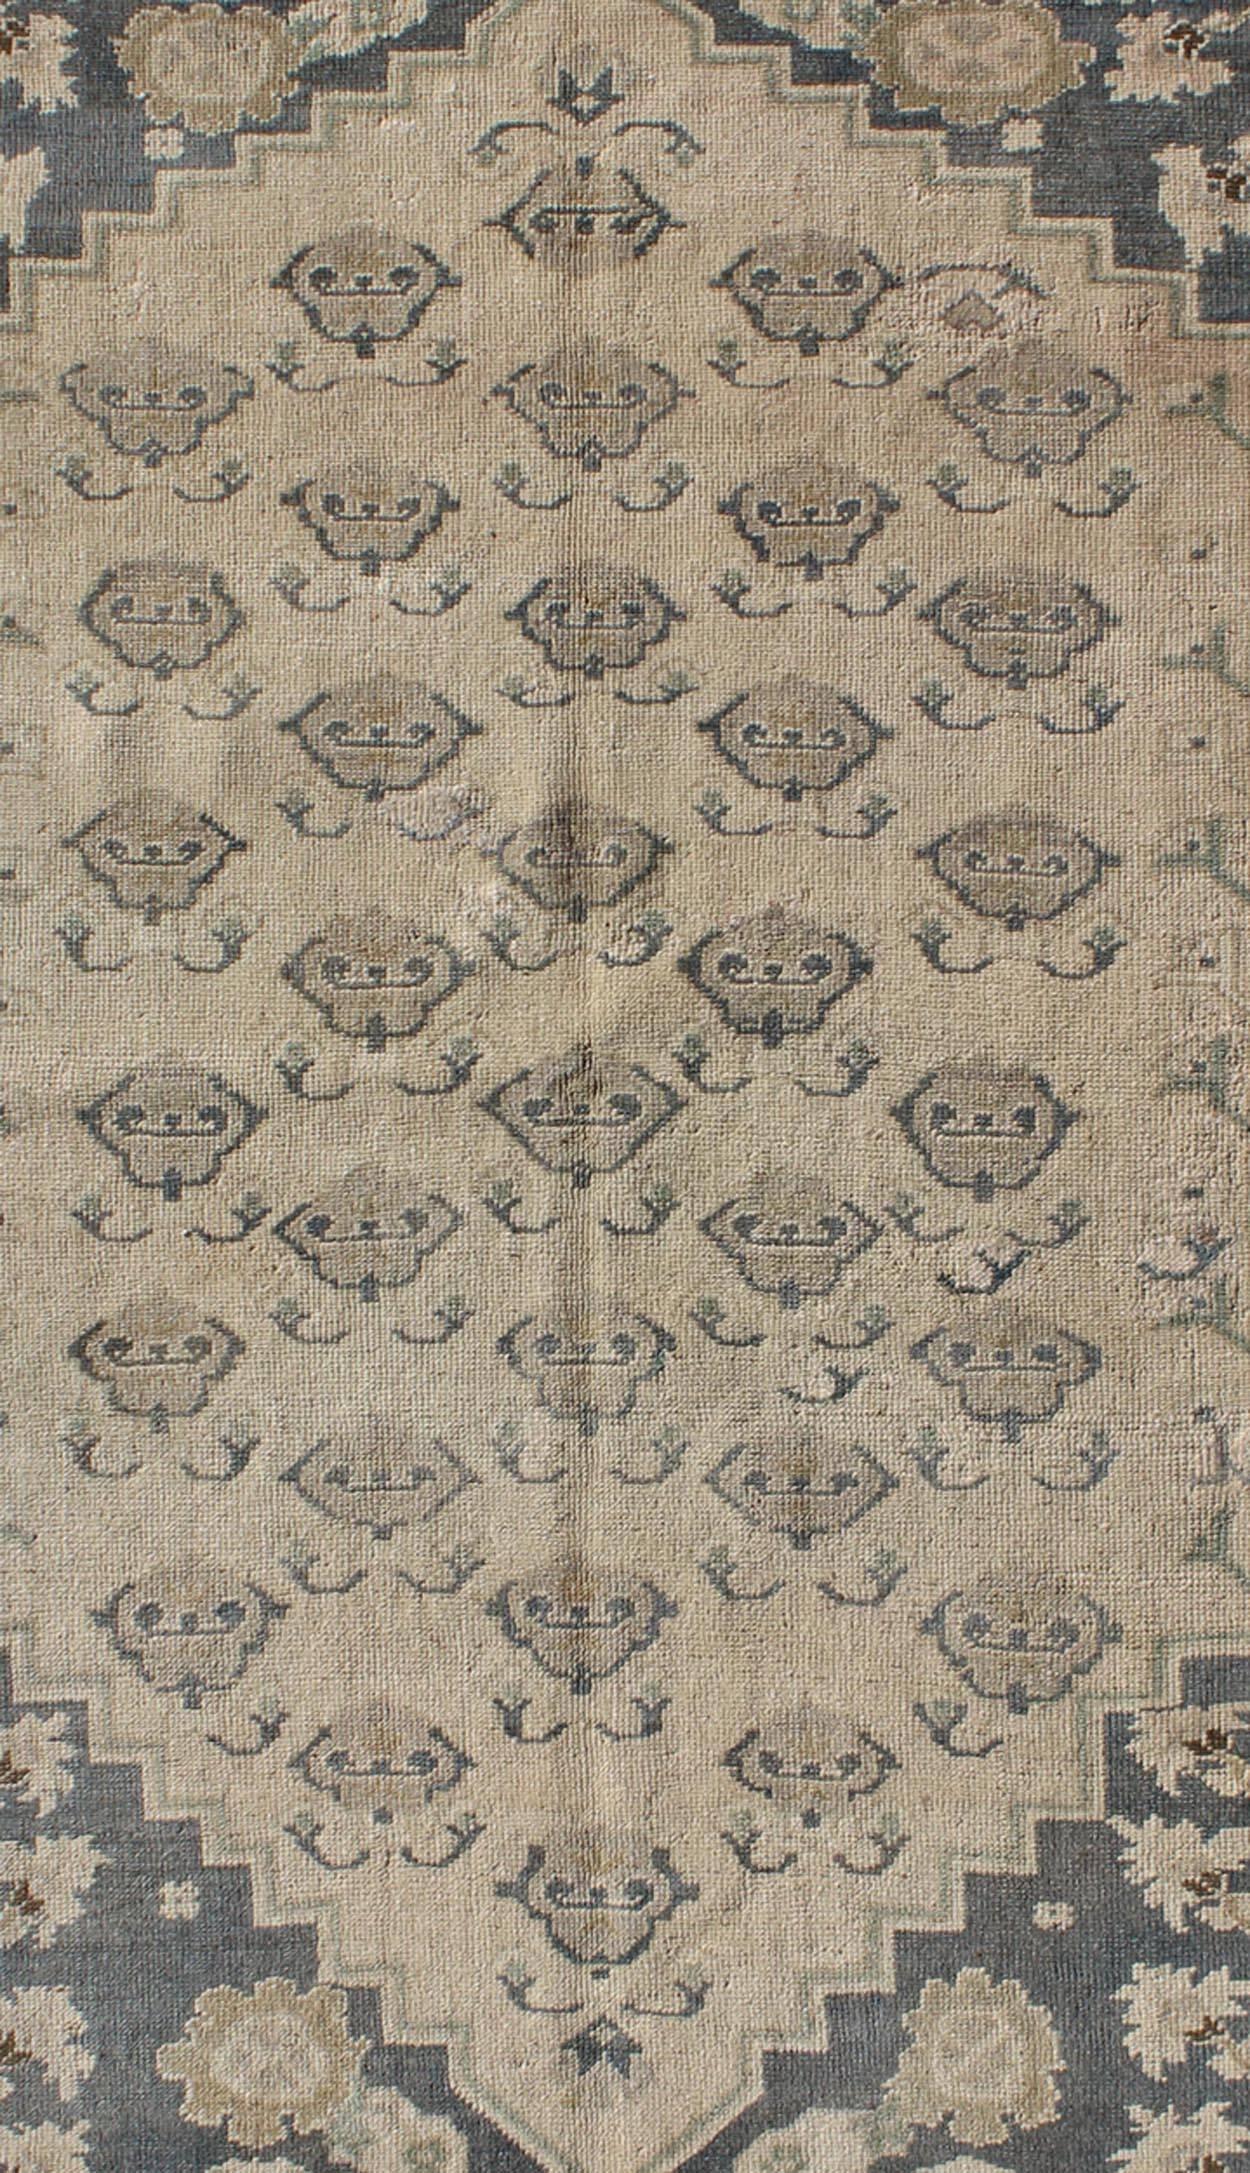 Hand-Knotted All-Over Blossom Design Vintage Turkish Oushak Rug in Taupe and Greyish Blue